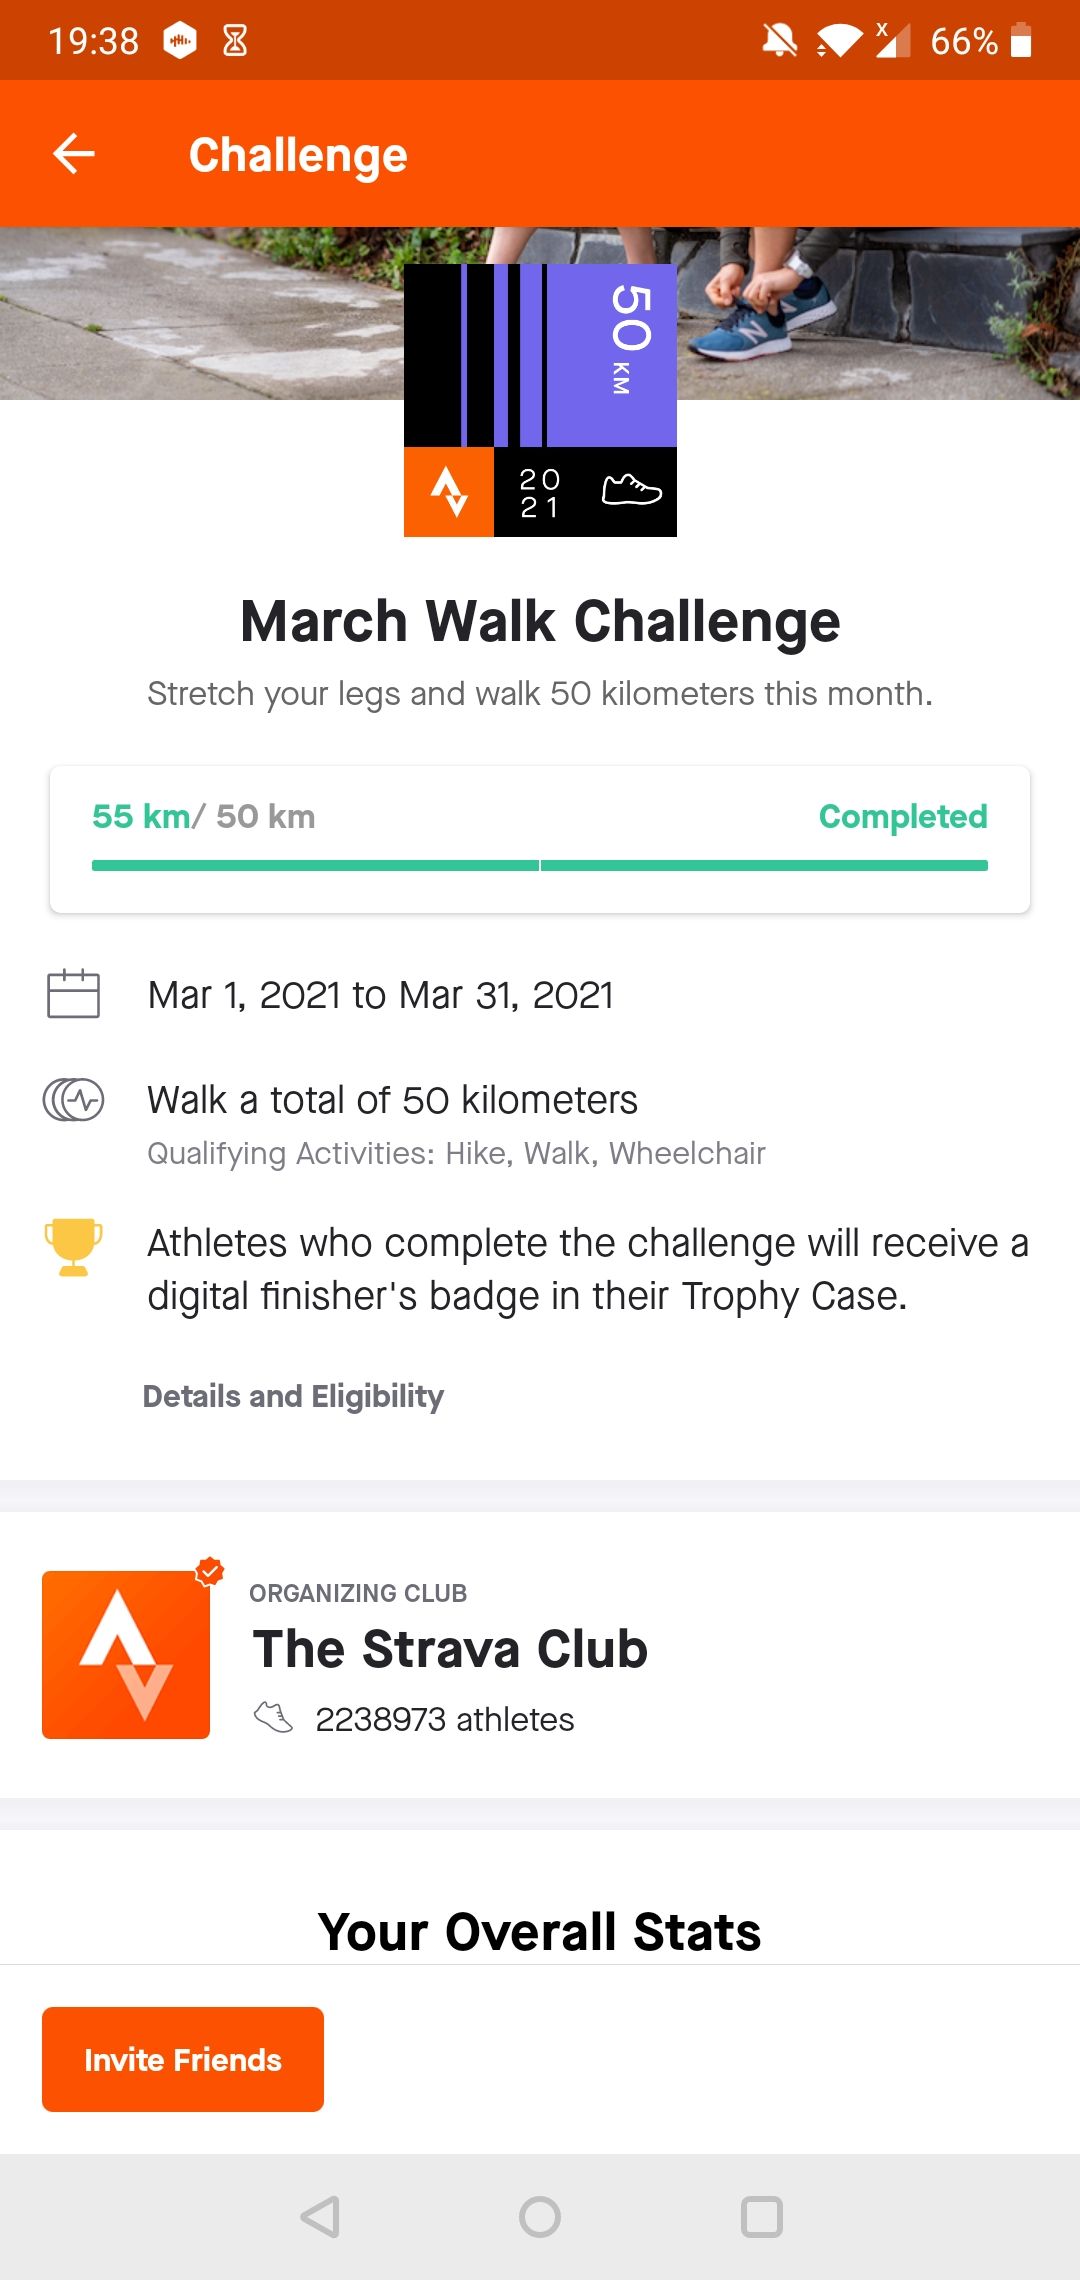 The "March Walk Challenge" on the Strava Android app.